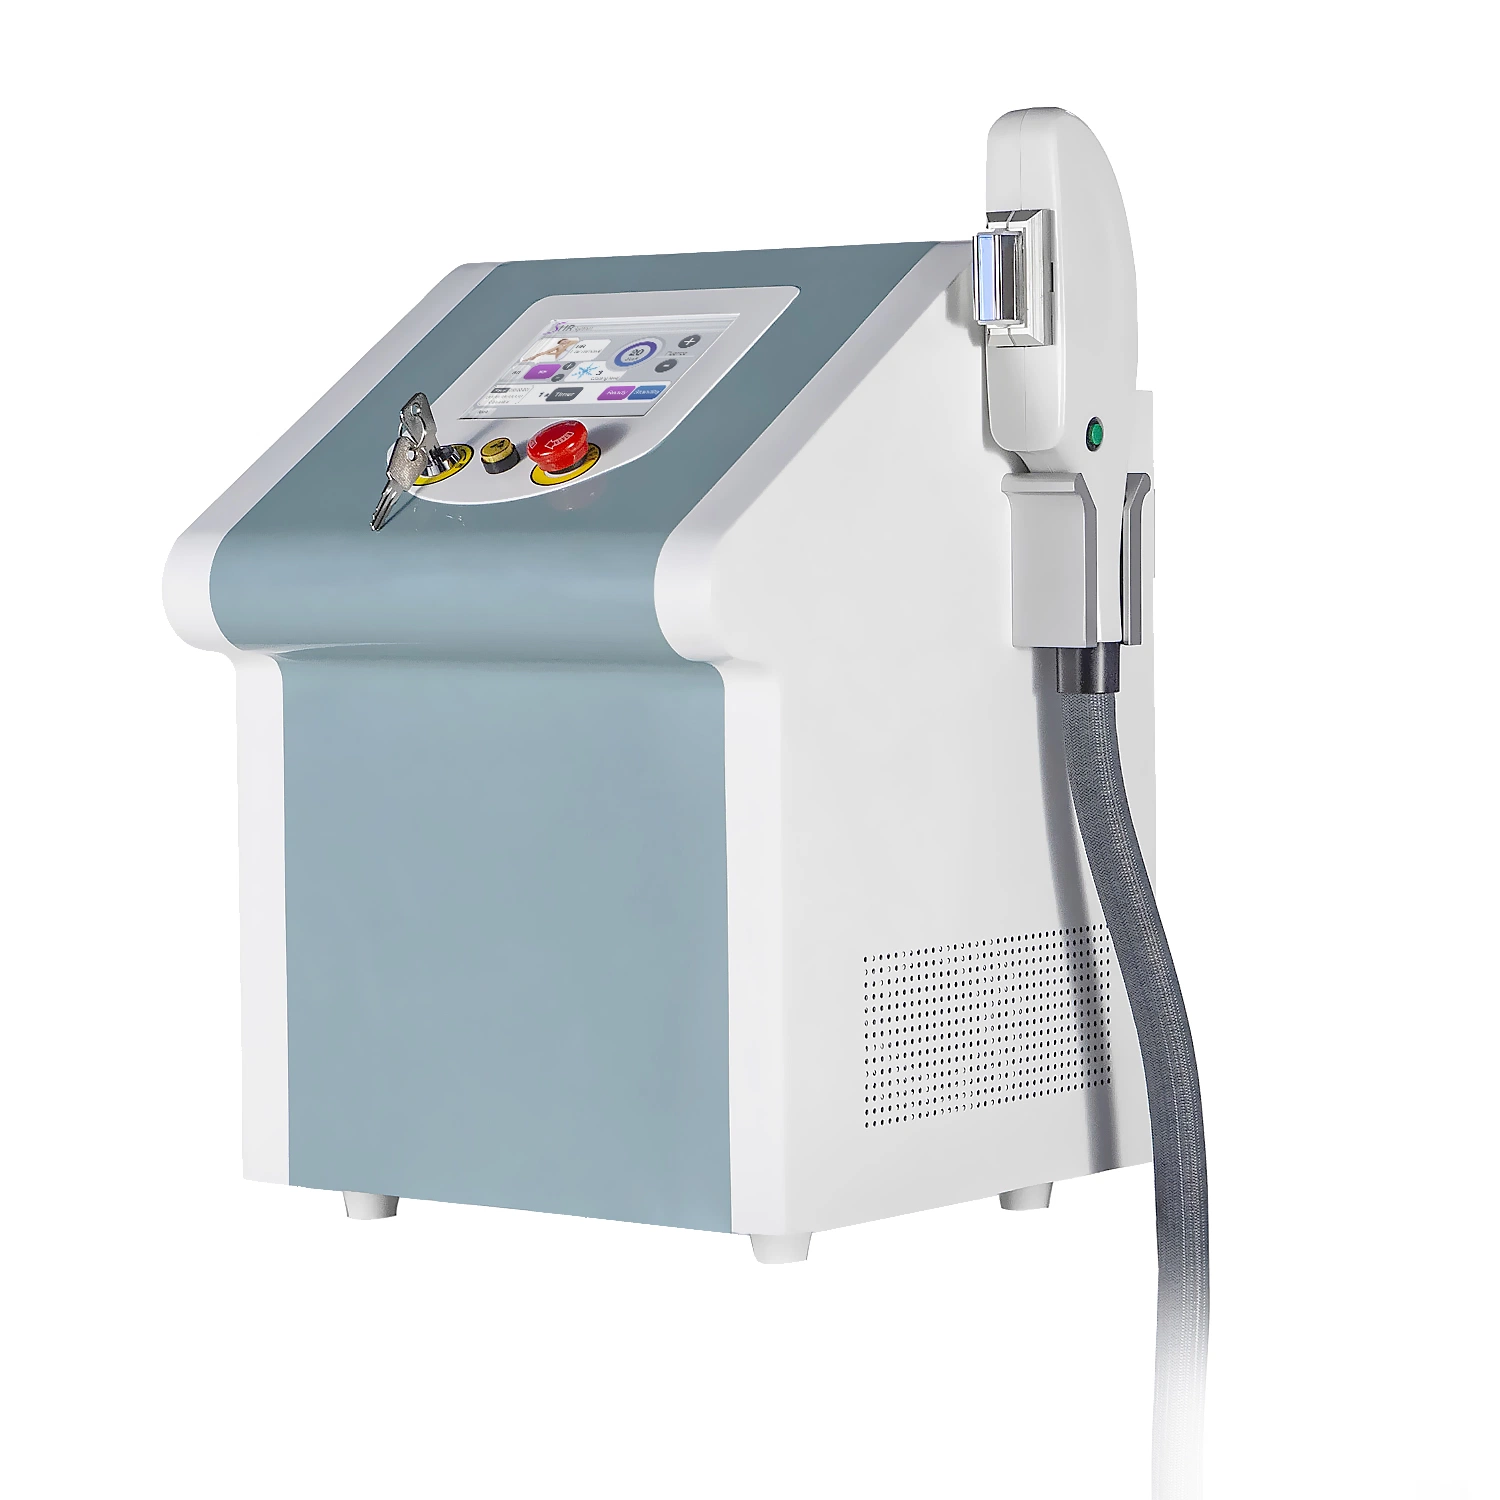 Professional IPL Laser Hair Removal and Skin Tightening Beauty Equipment